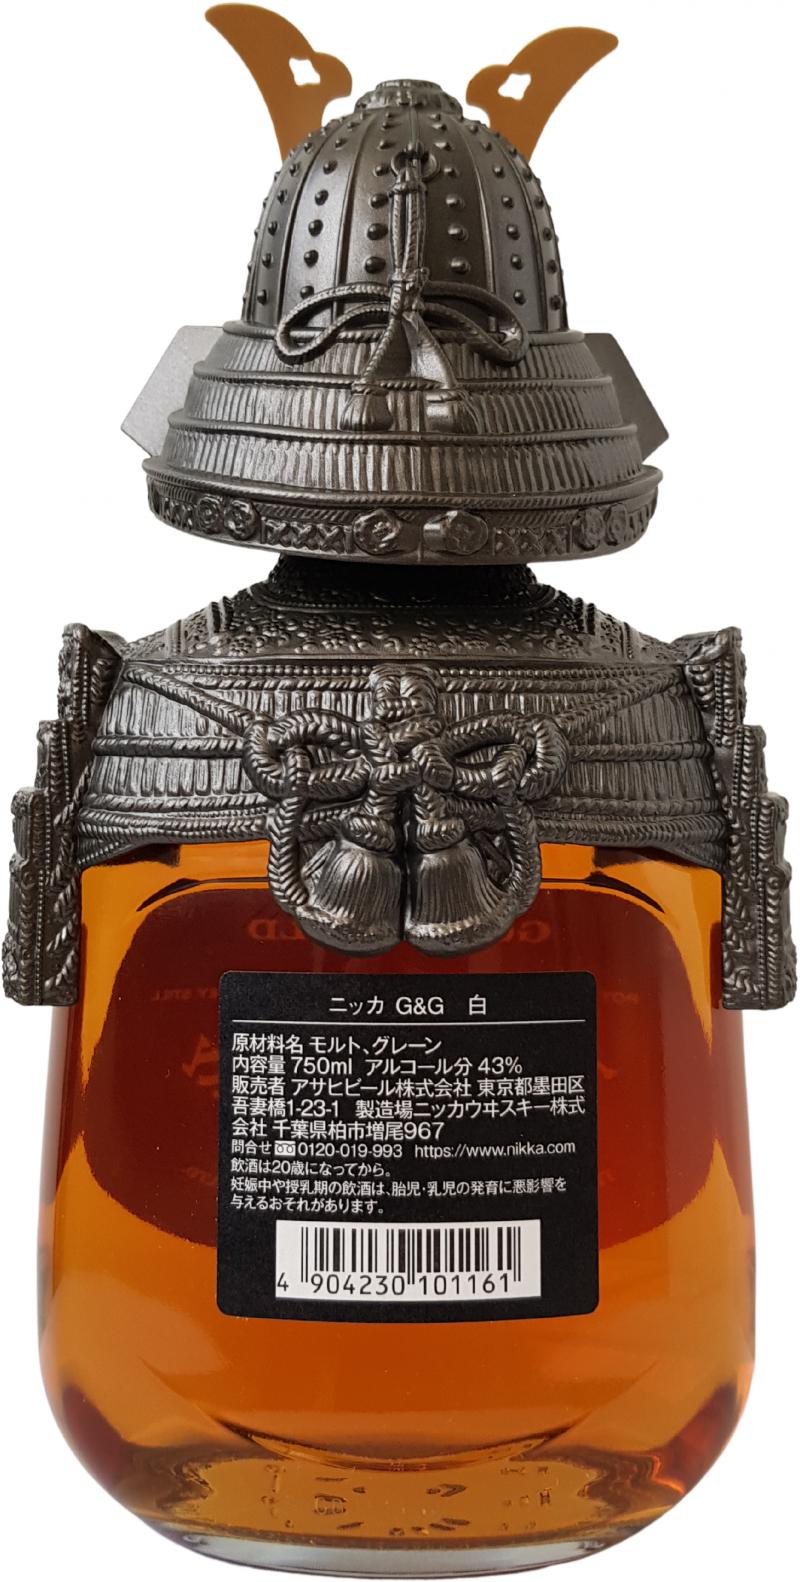 Le whisky Nikka Gold & Gold Samourai : une bouteille collector